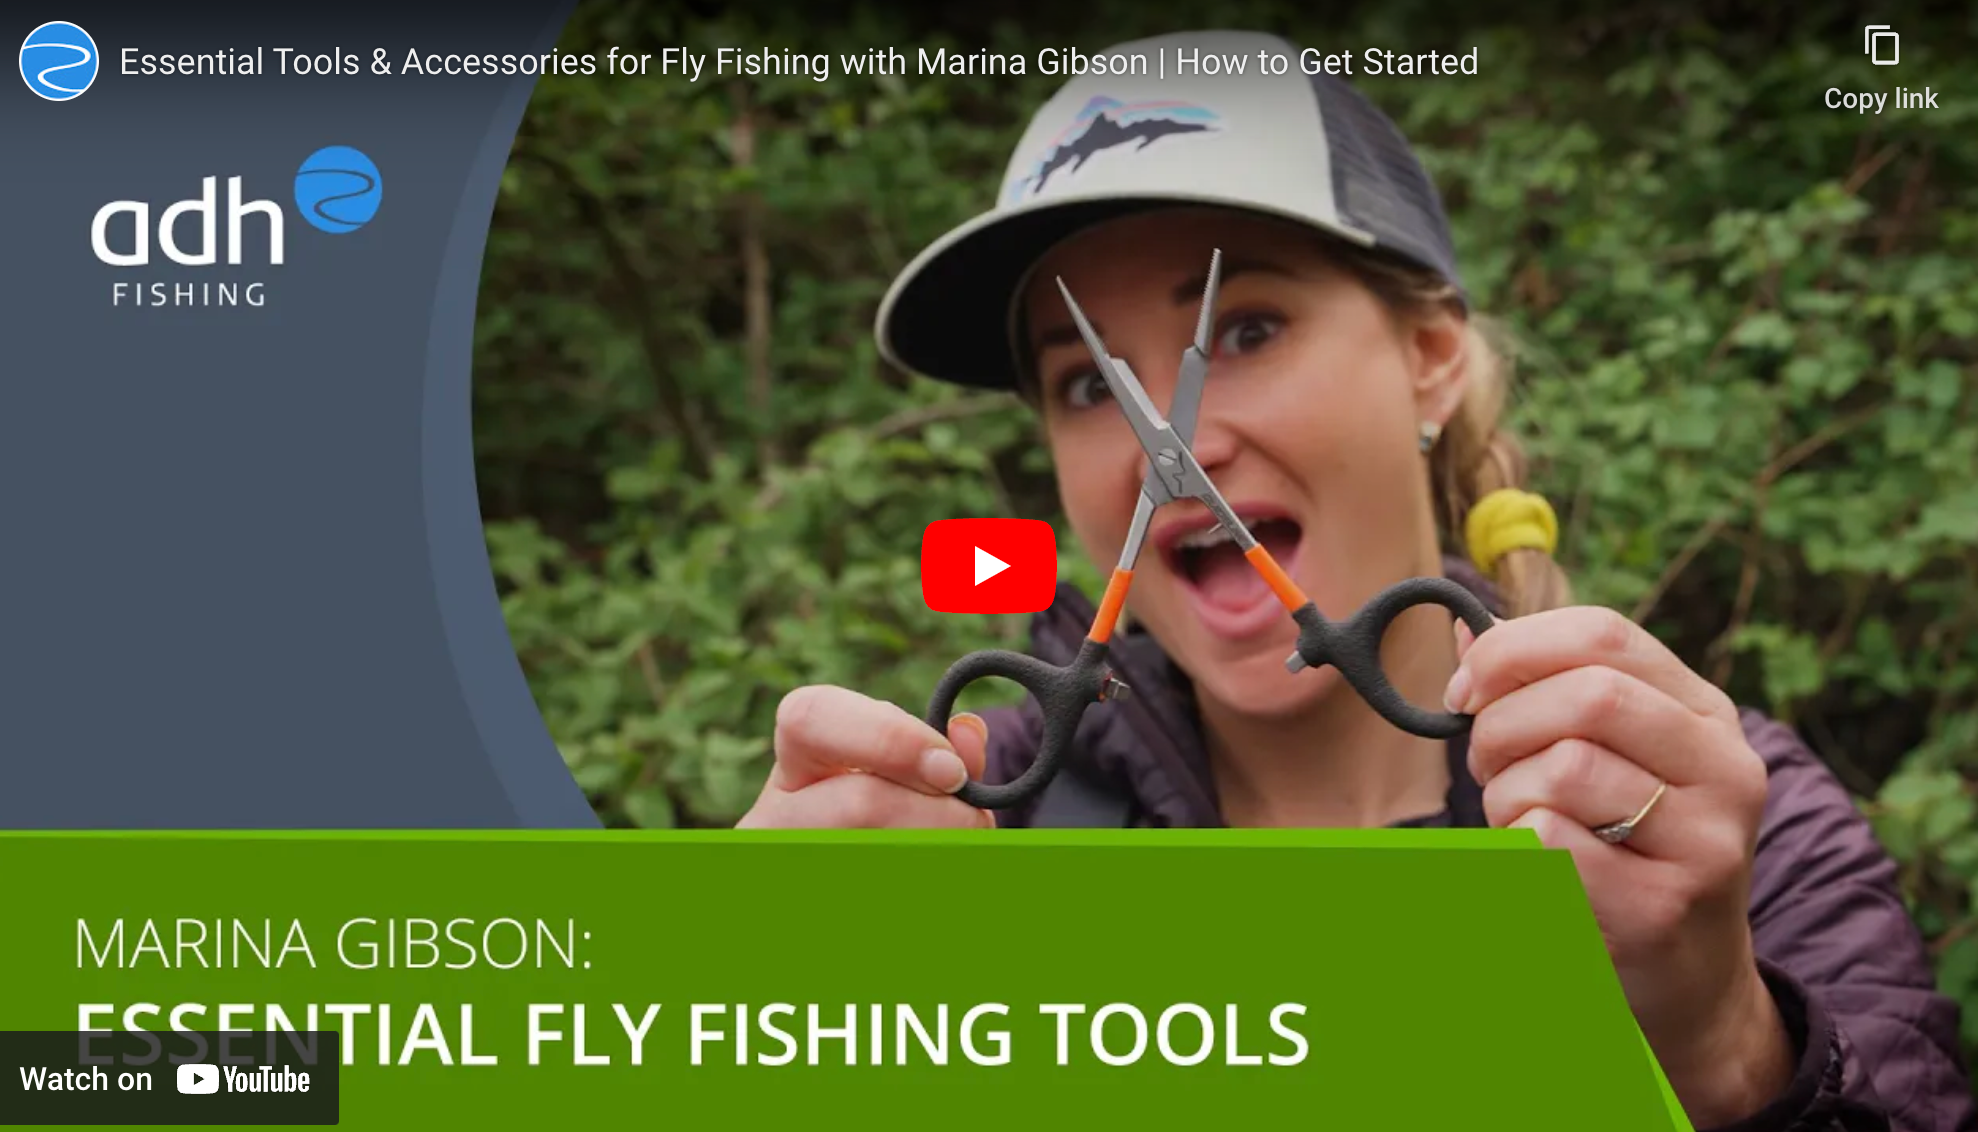 Marina Gibson - Fly fishing essentials video